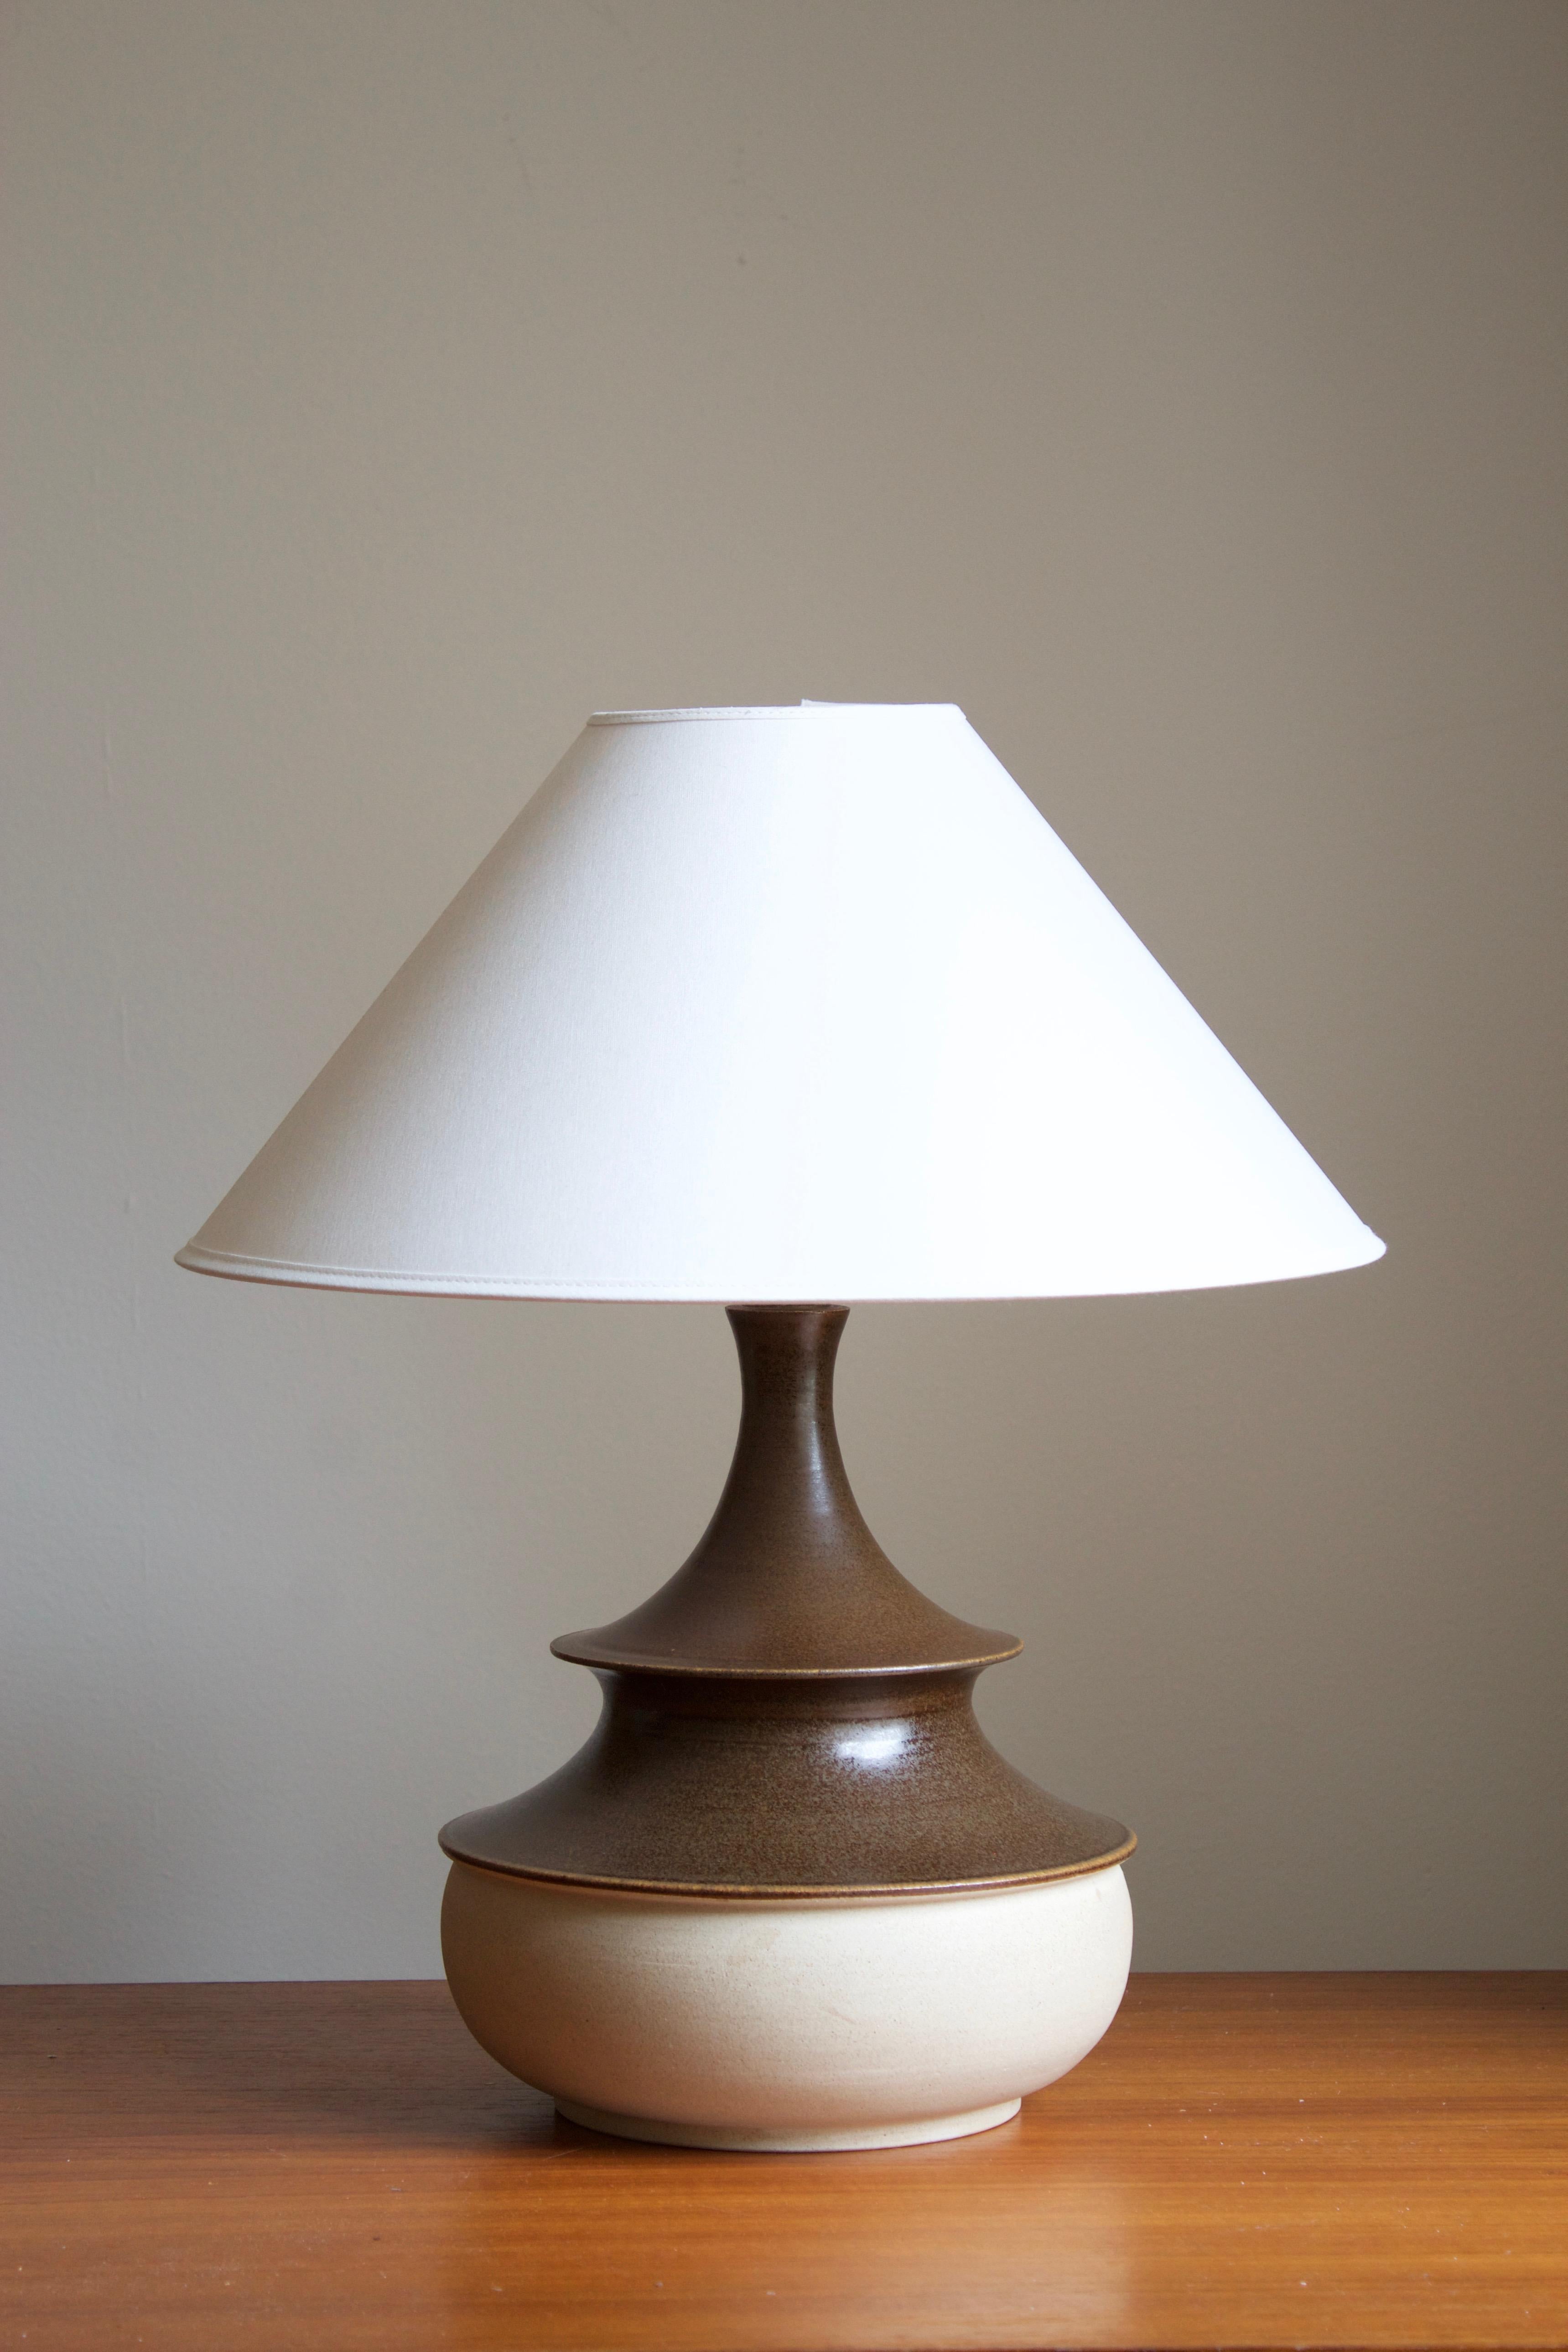 A large table lamp, designed and produced by Kähler, Denmark, c. 1940s-1950s. Marked.

Stated dimensions exclude lampshade. Height includes socket. Lampshade is not included in the purchase.

Glaze features brown-white colors.